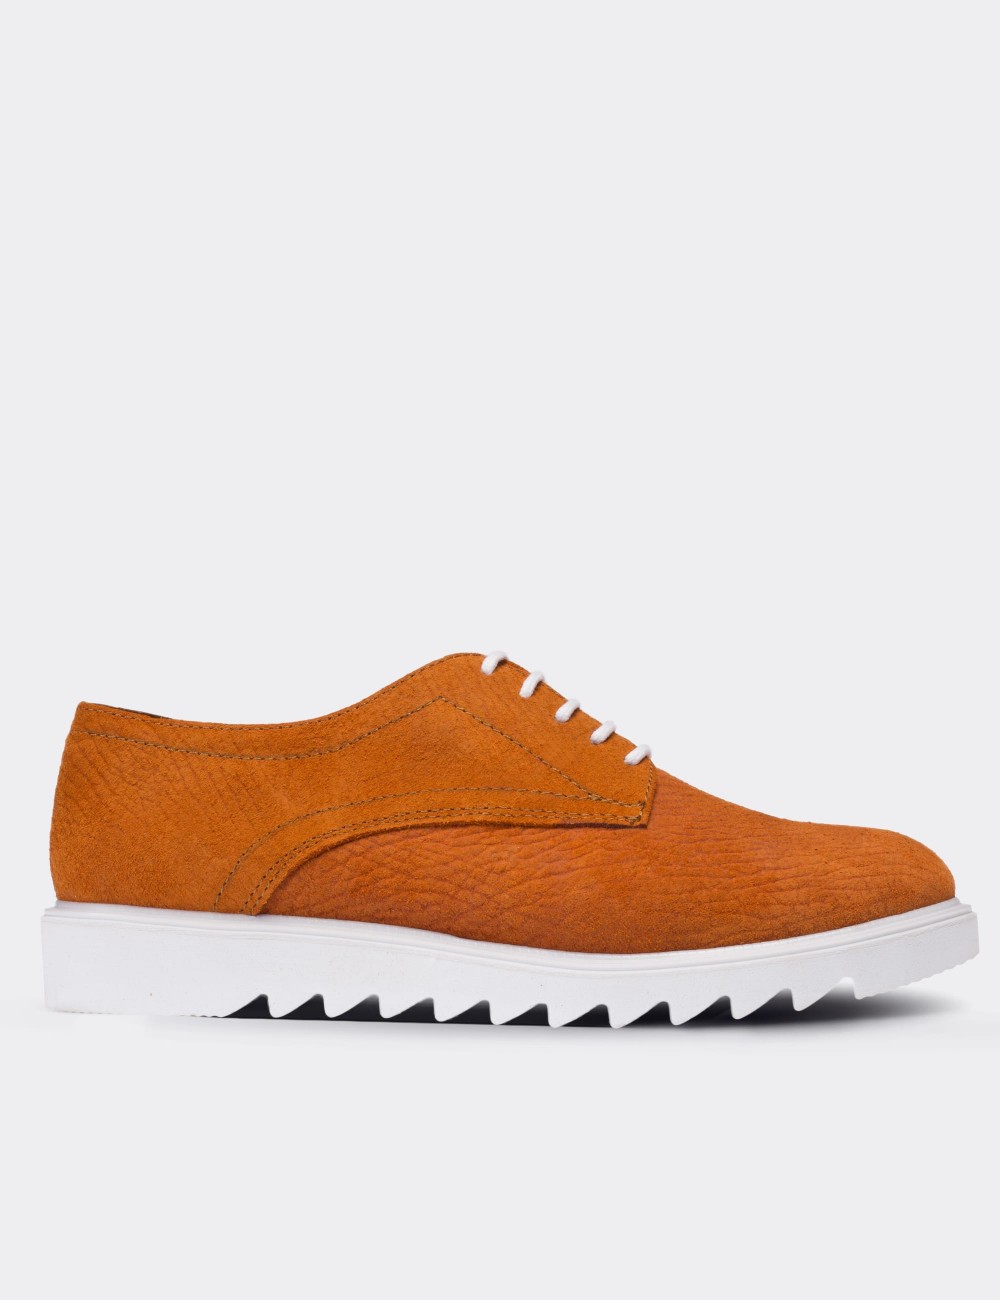 Orange Suede Leather Lace-up Shoes - 01430ZTRCP03